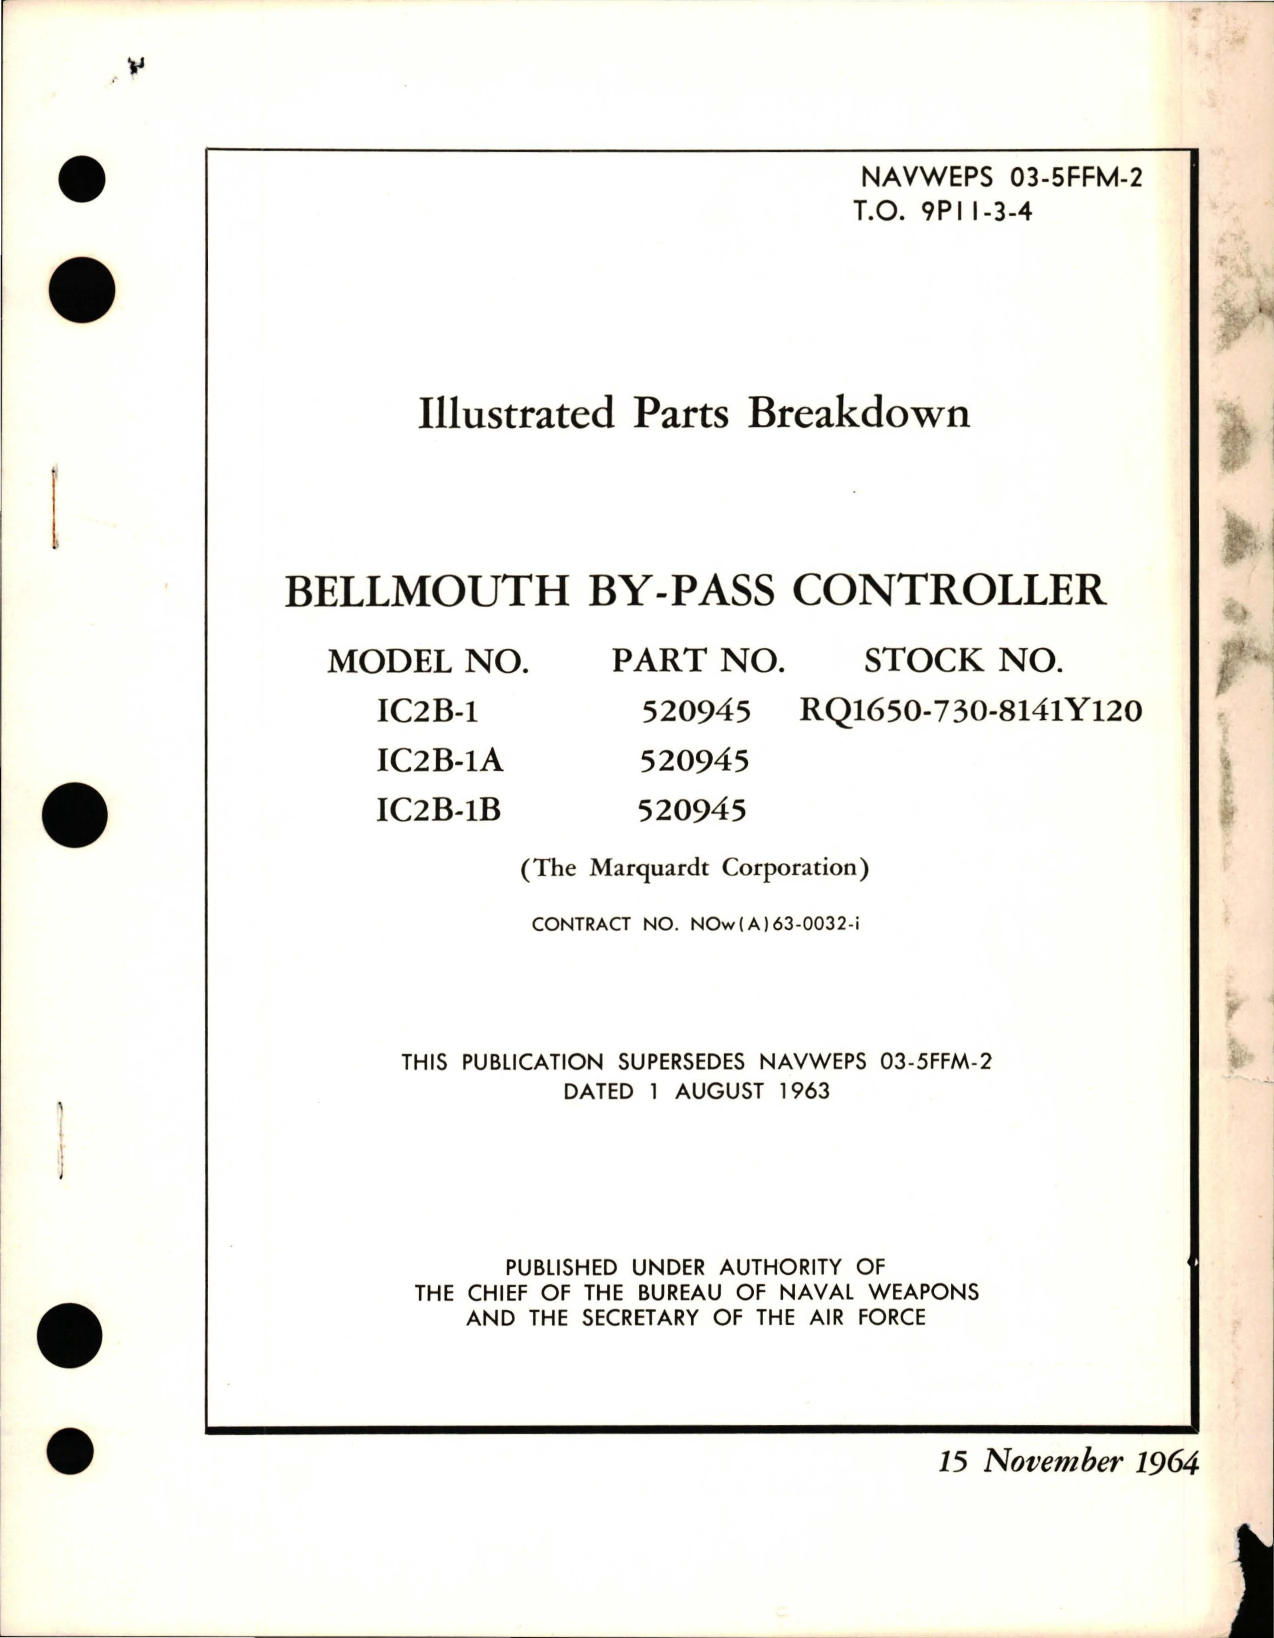 Sample page 1 from AirCorps Library document: Illustrated Parts Breakdown for Bellmouth By-Pass Controller - Models 1C2B-1, 1C2B-1A, and 1C2B-1B - Part 520945